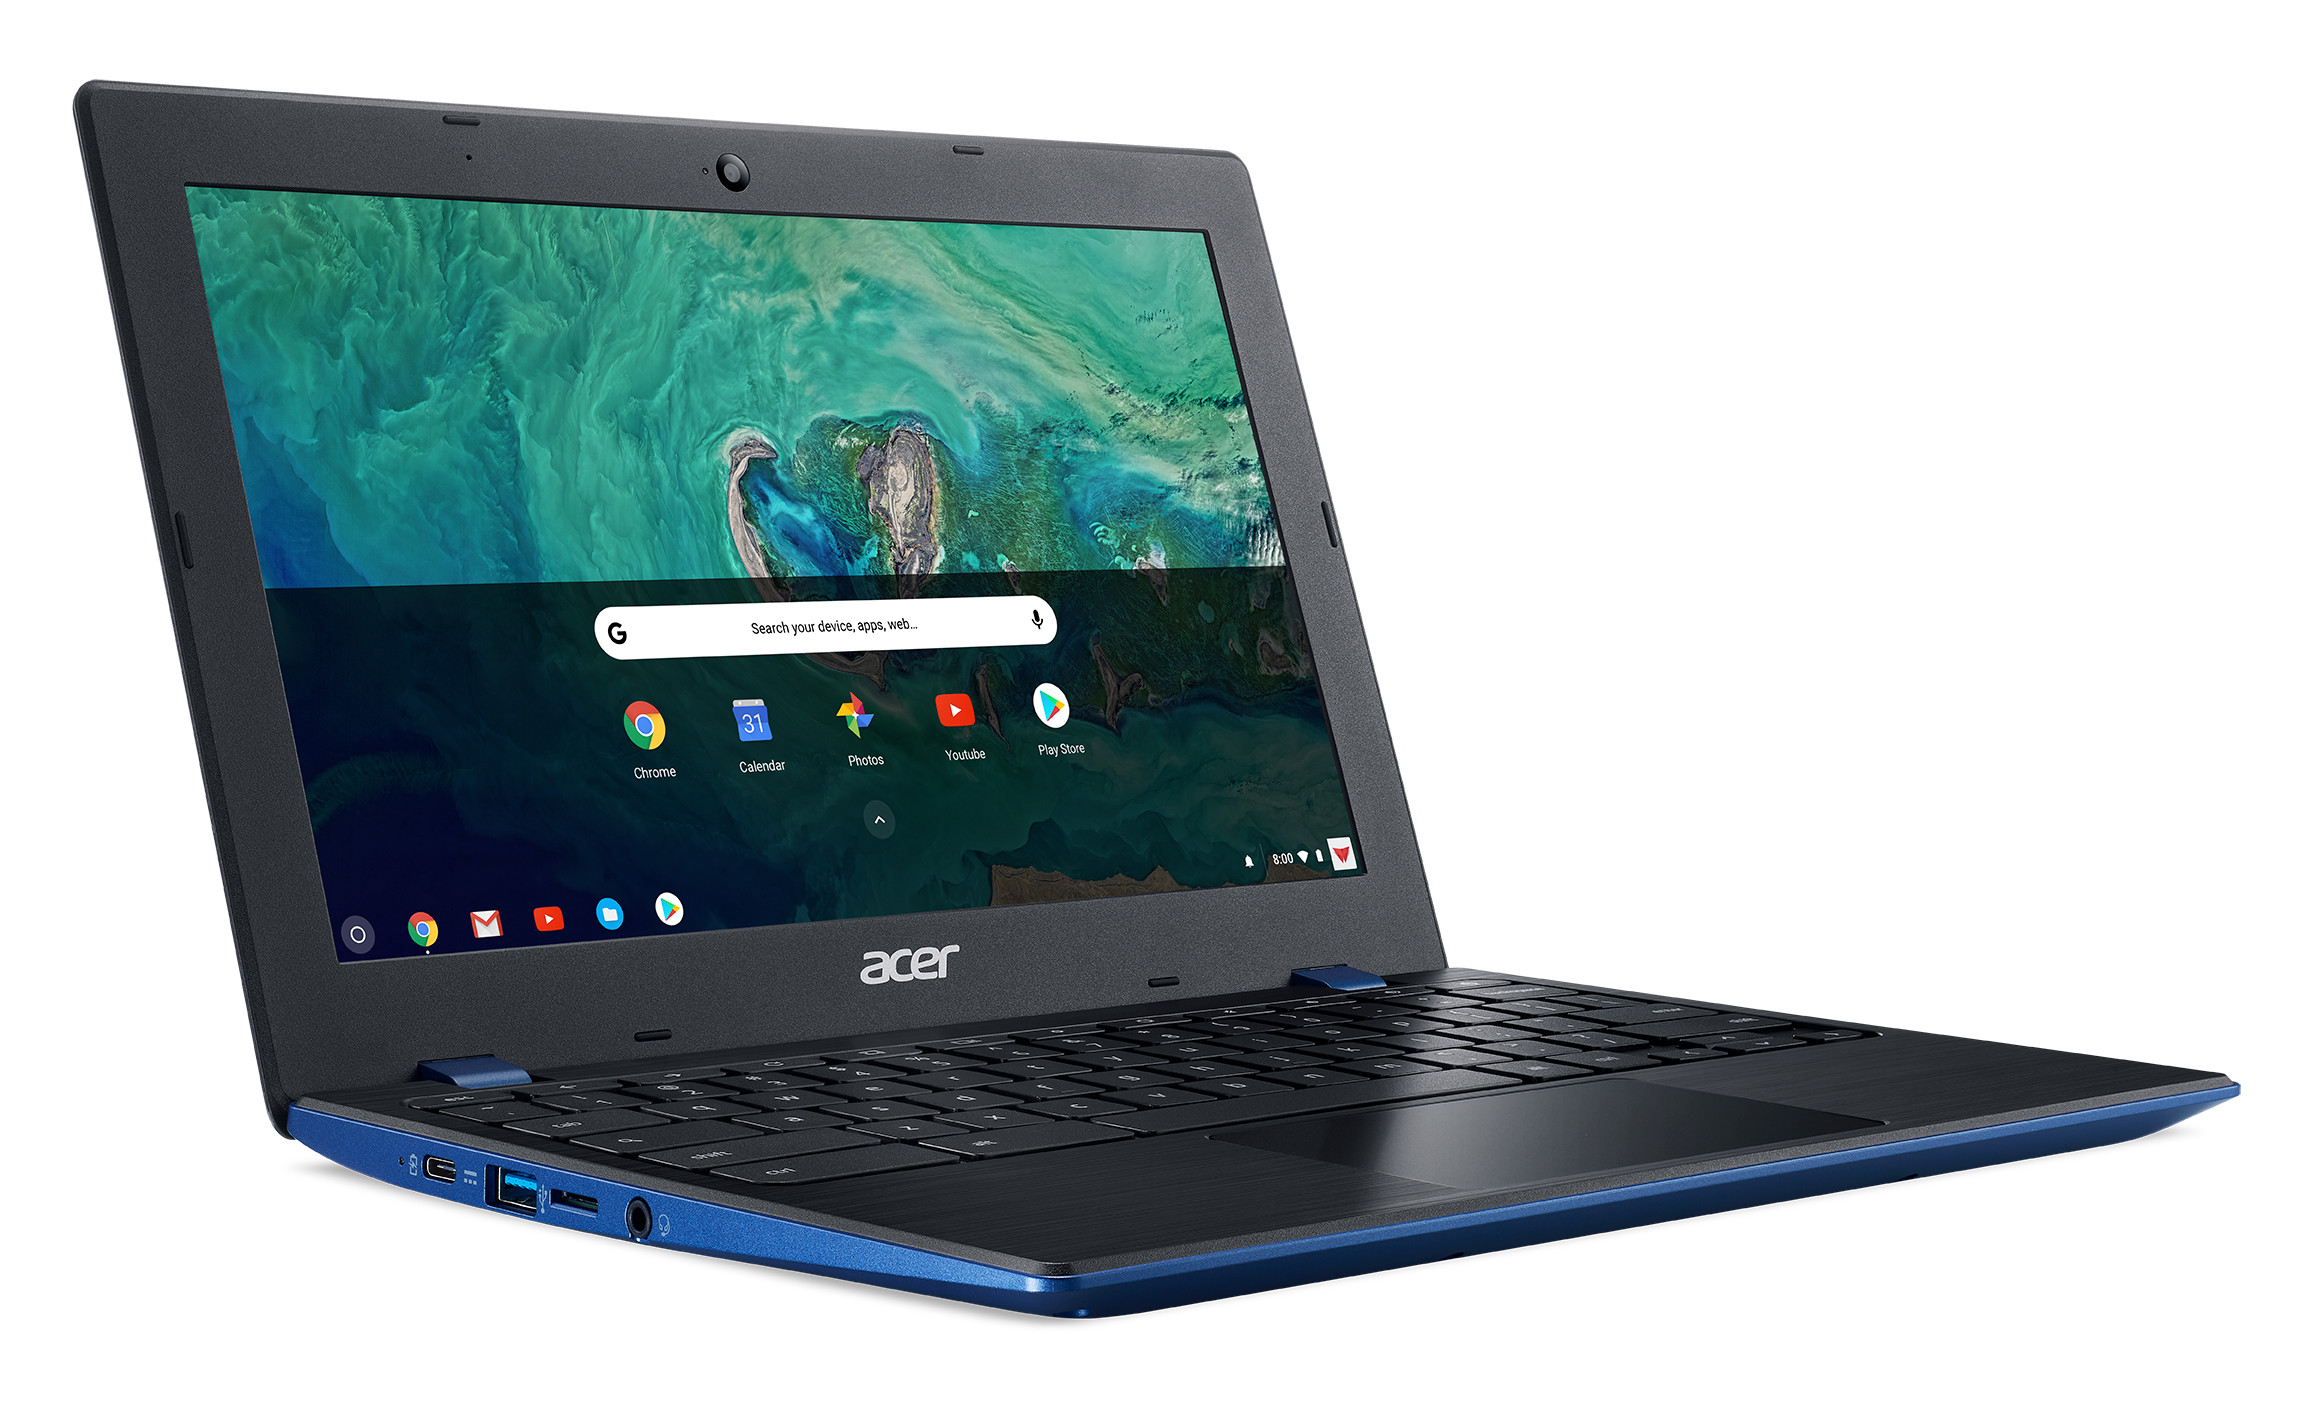 Acer Chromebook 11 brings USB Type-C goodness at an